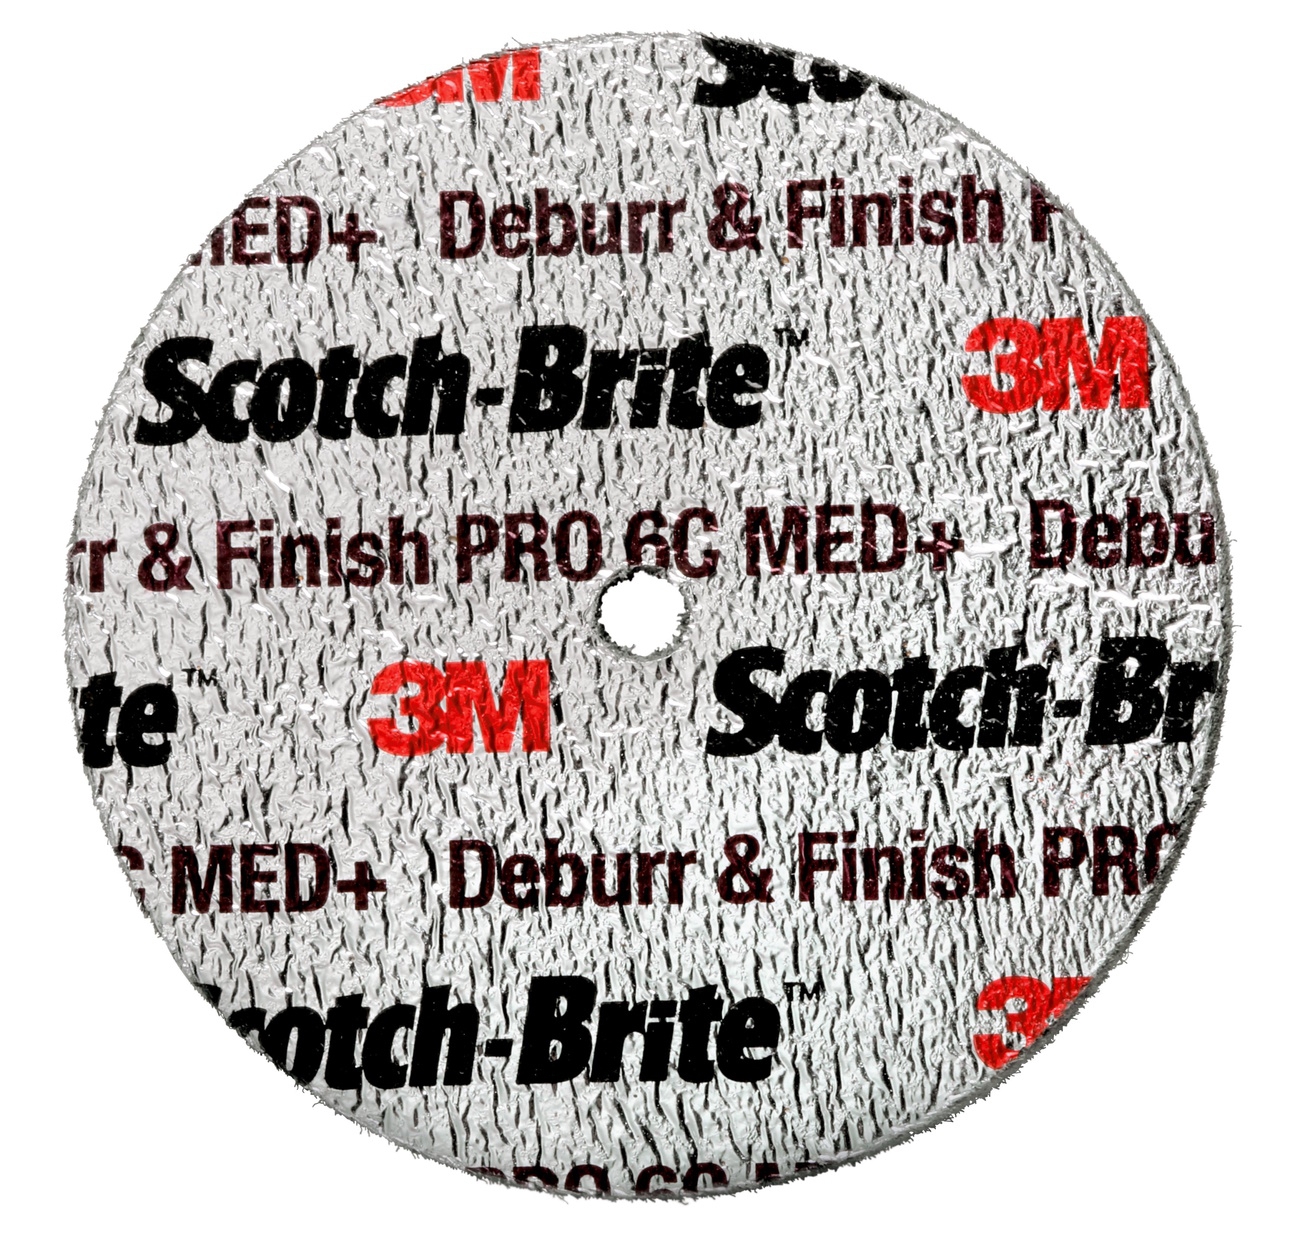 3M Scotch-Brite Deburr and Finish PRO compact disc DP-UW, 25 mm x 25 mm x 6.35 mm, 4C MED+